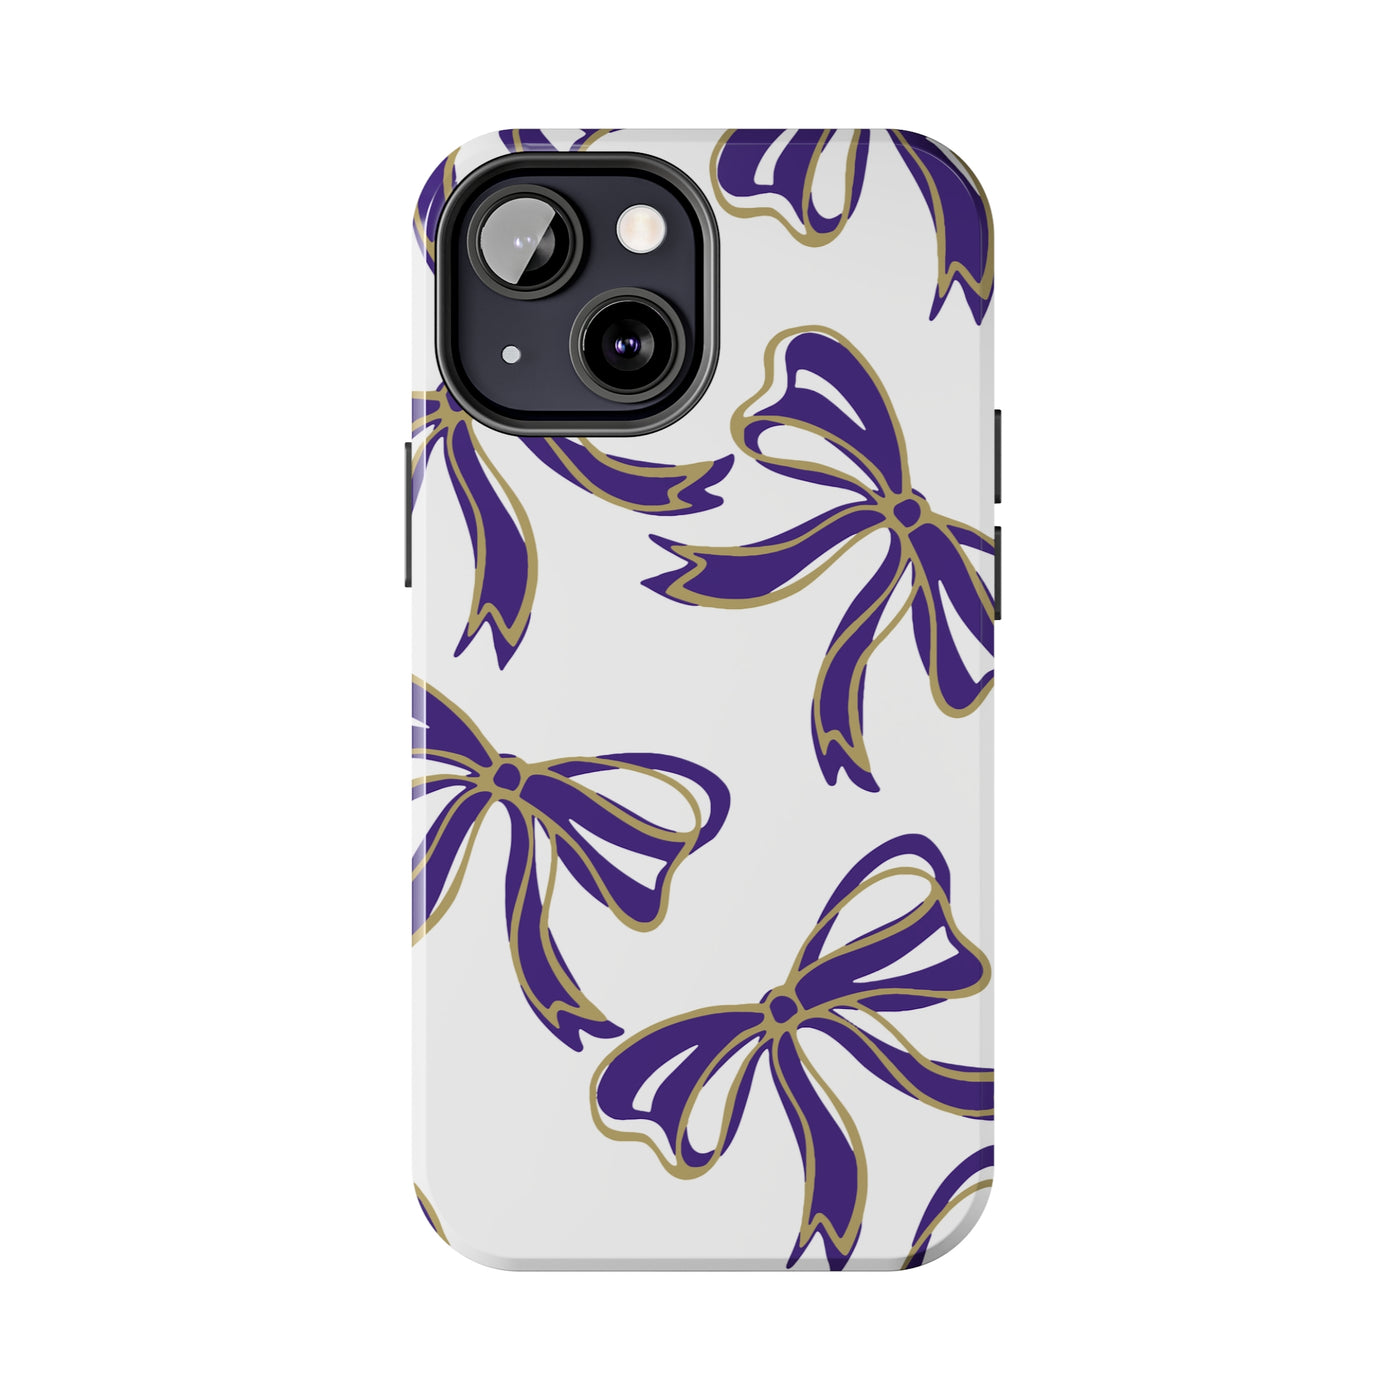 Copy of Trendy Bow Phone Case, Bed Party Bow Iphone case, Bow Phone Case, College Case, Bow Gifts - James Madison - JMU Dukes - Purple and Gold